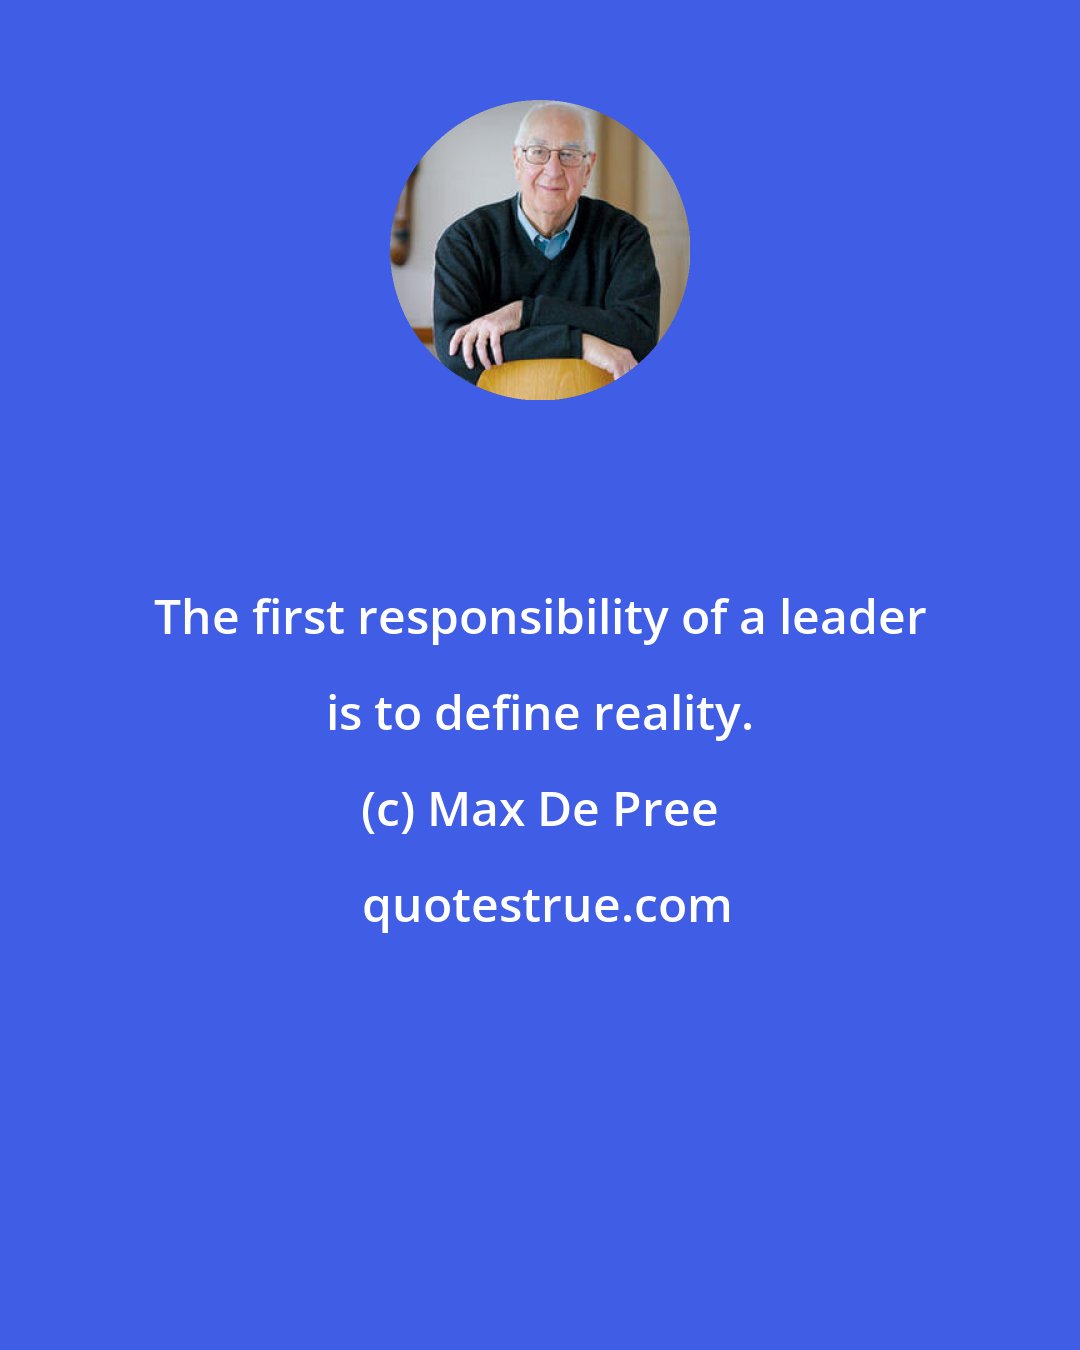 Max De Pree: The first responsibility of a leader is to define reality.